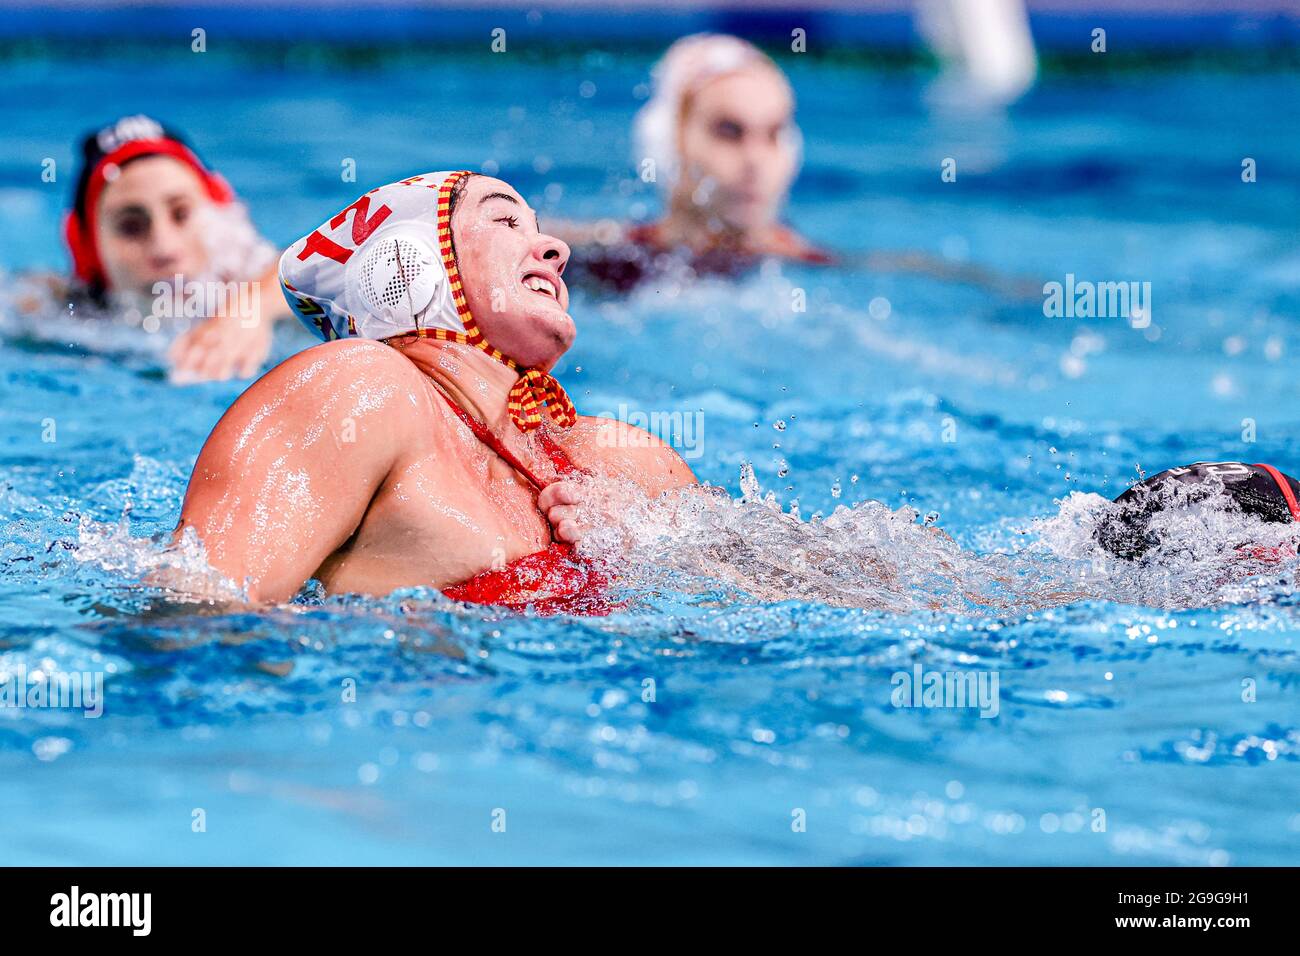 TOKYO, JAPAN - JULY 26: Paula Leiton of Spain during the Tokyo 2020 Olympic  Waterpolo Tournament Women match between Team Spain and Team Canada at  Tatsumi Waterpolo Centre on July 26, 2021